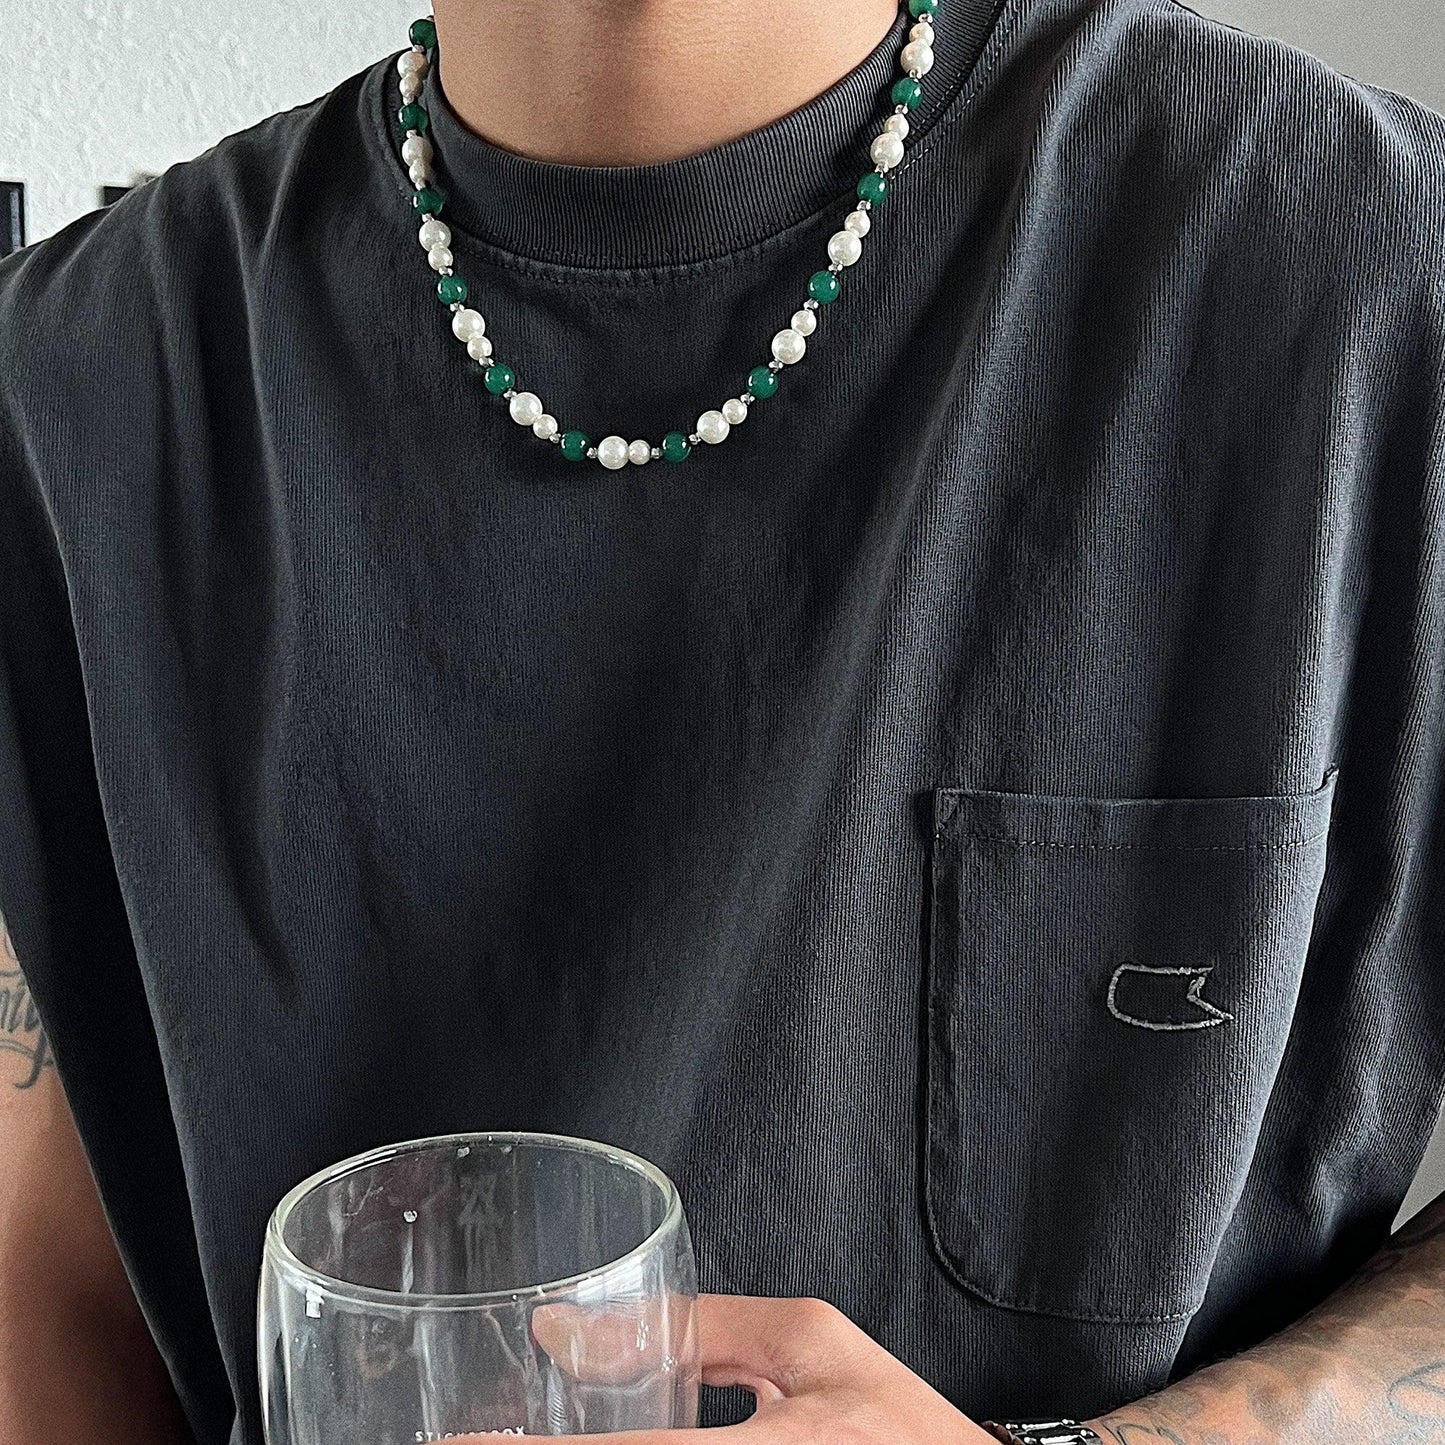 Stitching Green Beaded Necklace